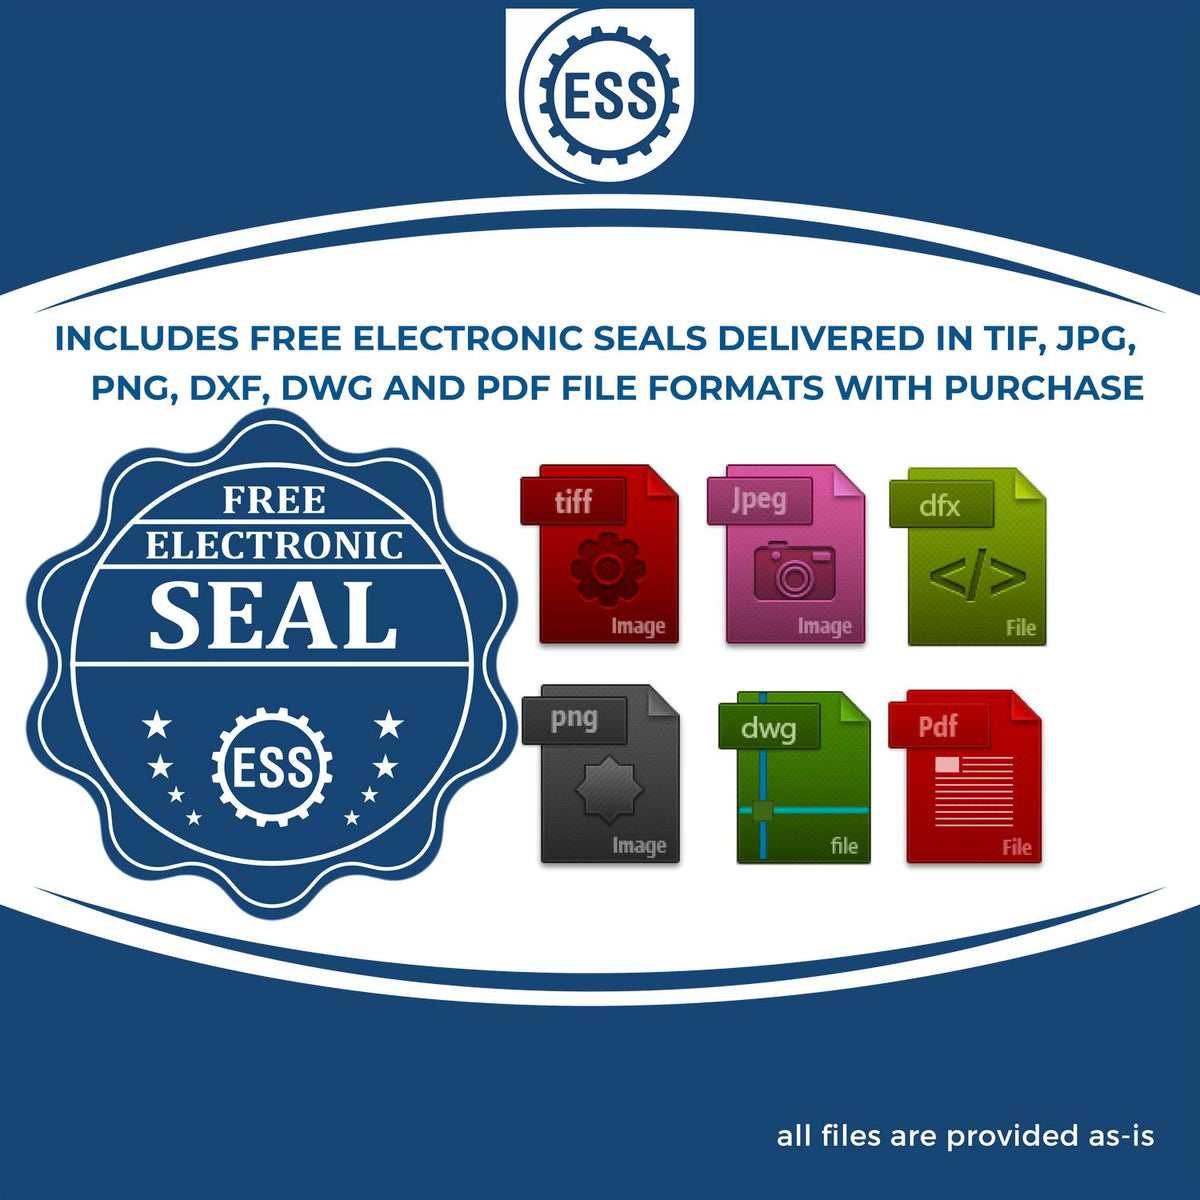 An infographic for the free electronic seal for the North Carolina Professional Geologist Seal Stamp illustrating the different file type icons such as DXF, DWG, TIF, JPG and PNG.